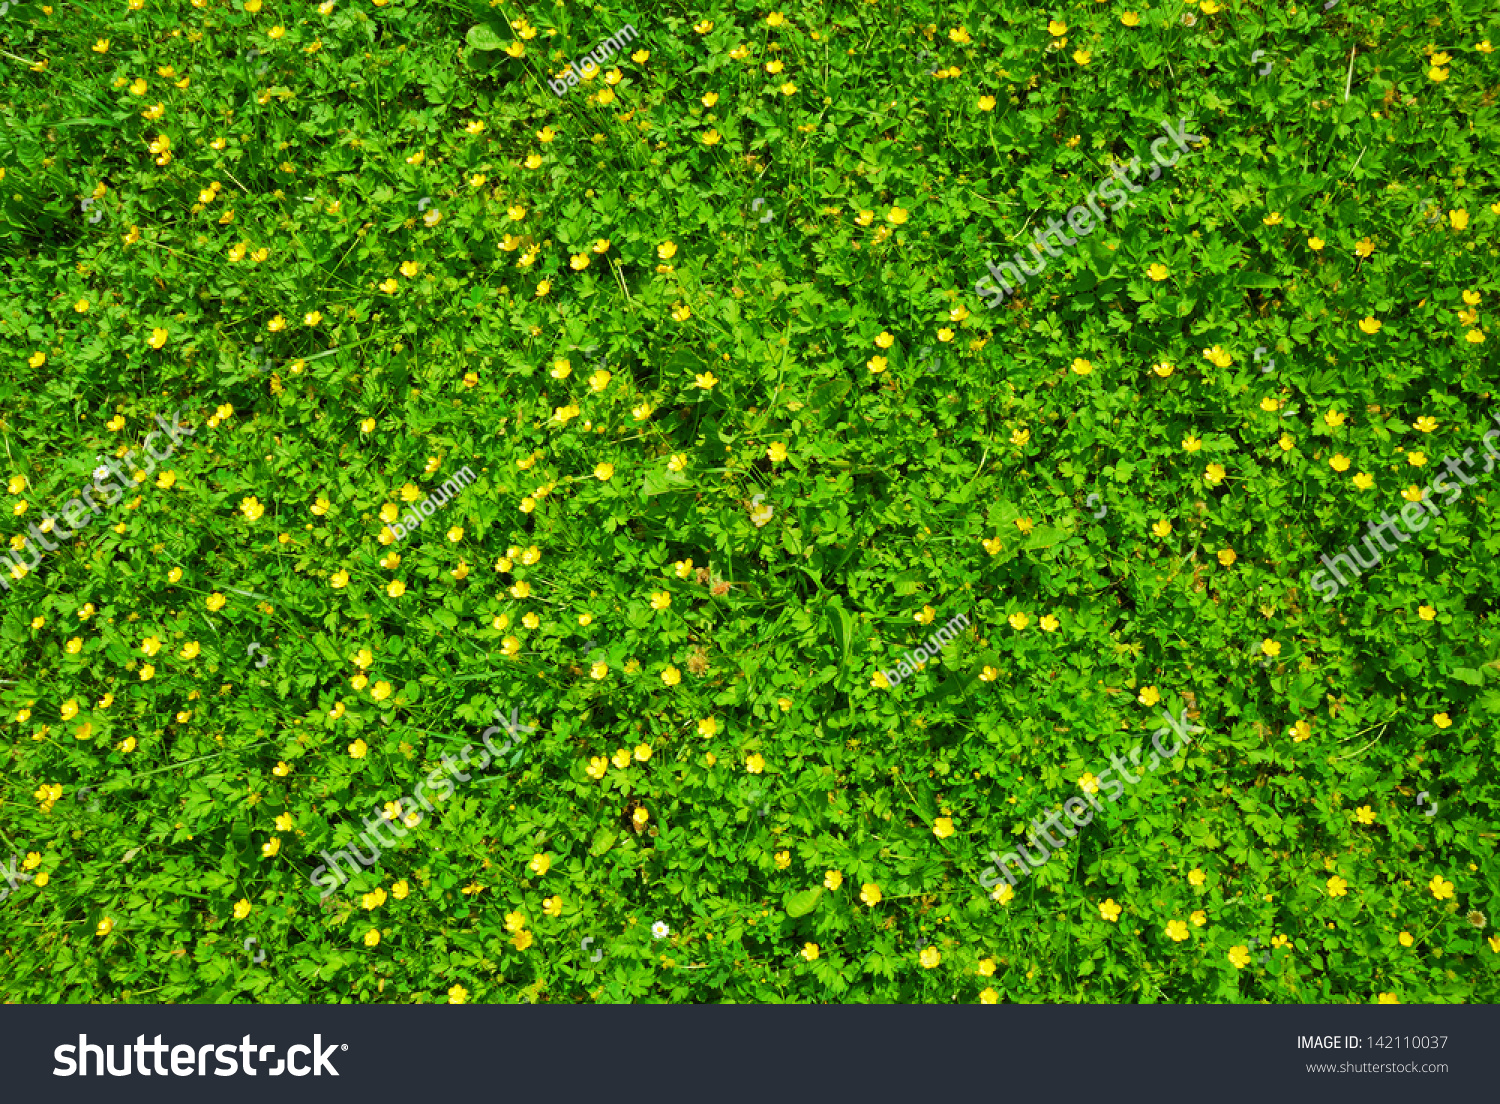 Spring Green Grass Texture With Flowers Stock Photo 142110037 ...